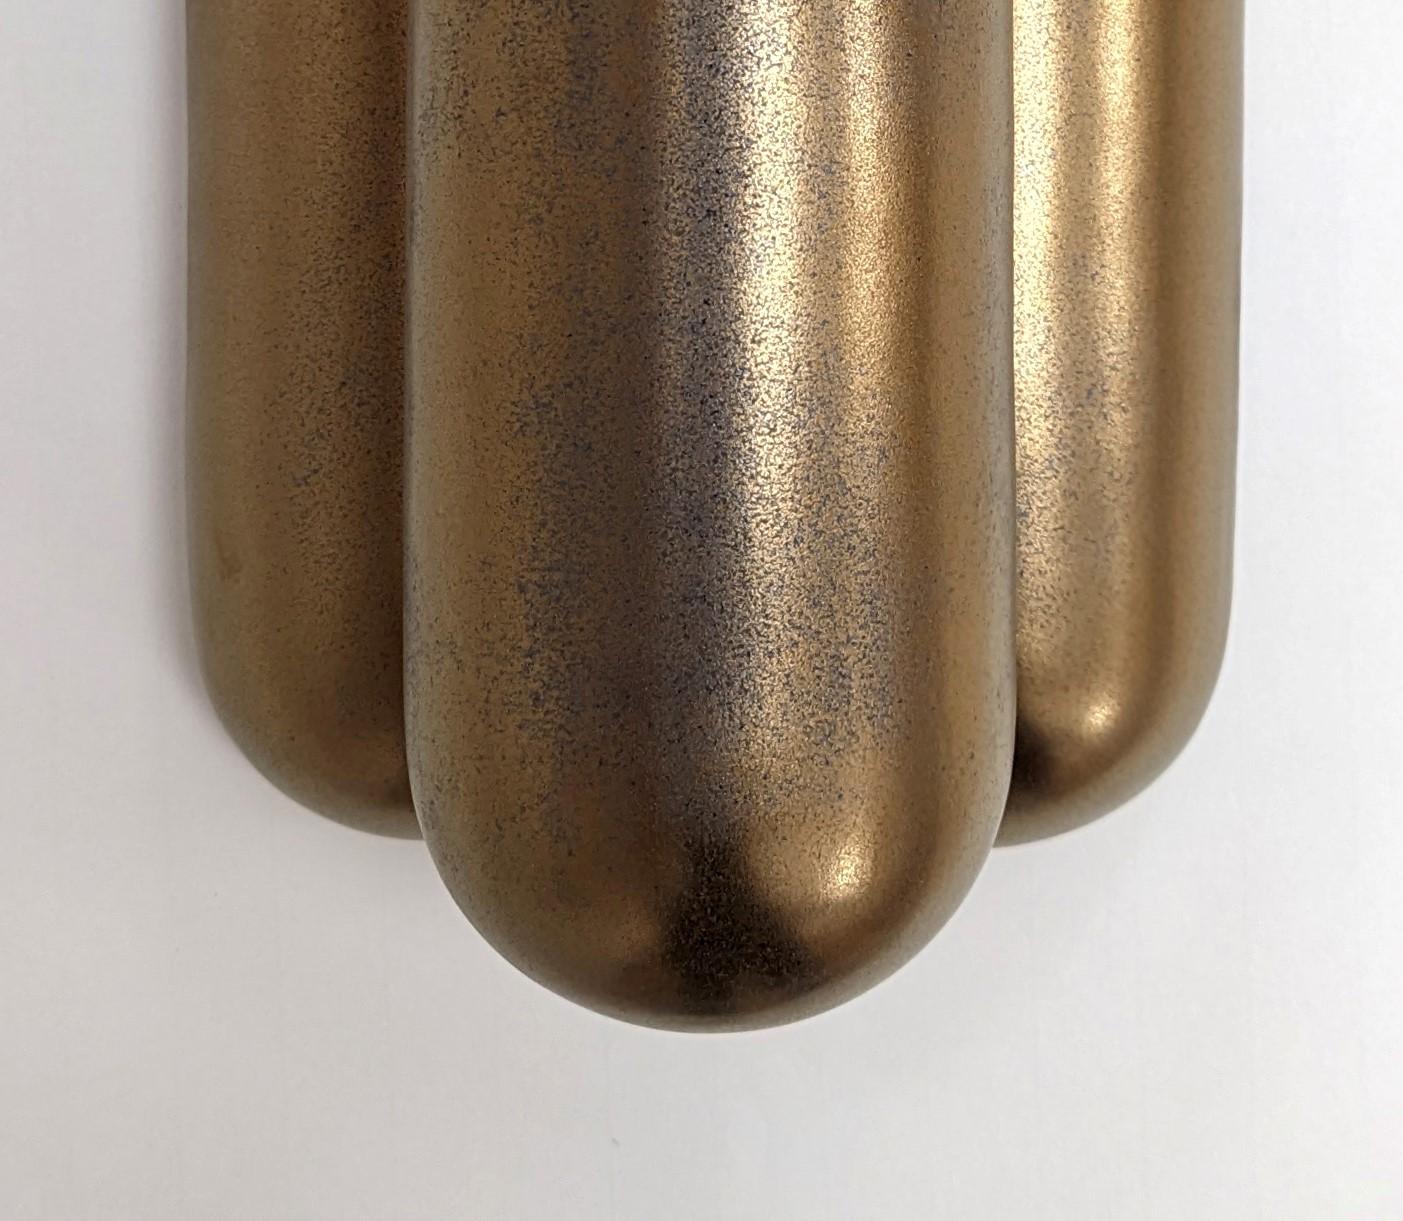 French Blackened Gold Moor Plus Brillance Wall Light by Lisa Allegra